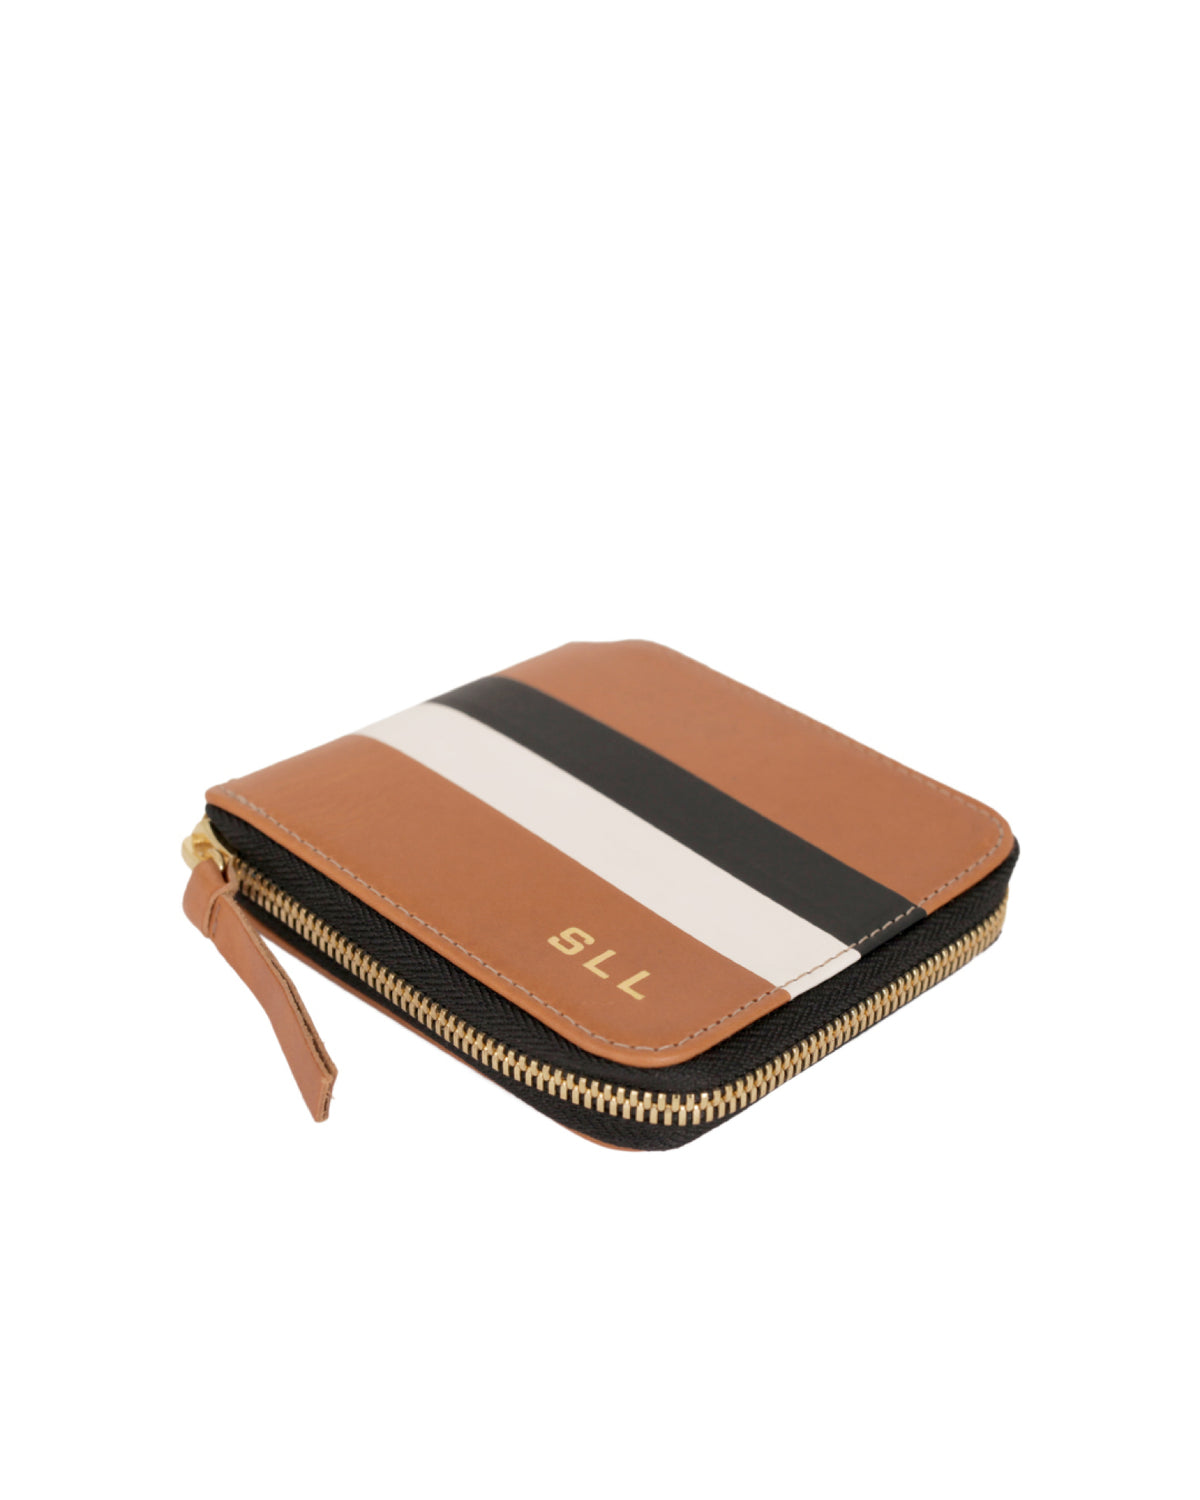 Cuoio with Black and Cream Stripes Half Zip Wallet with Short Gold Foil Monogram On The Lower Right Corner.